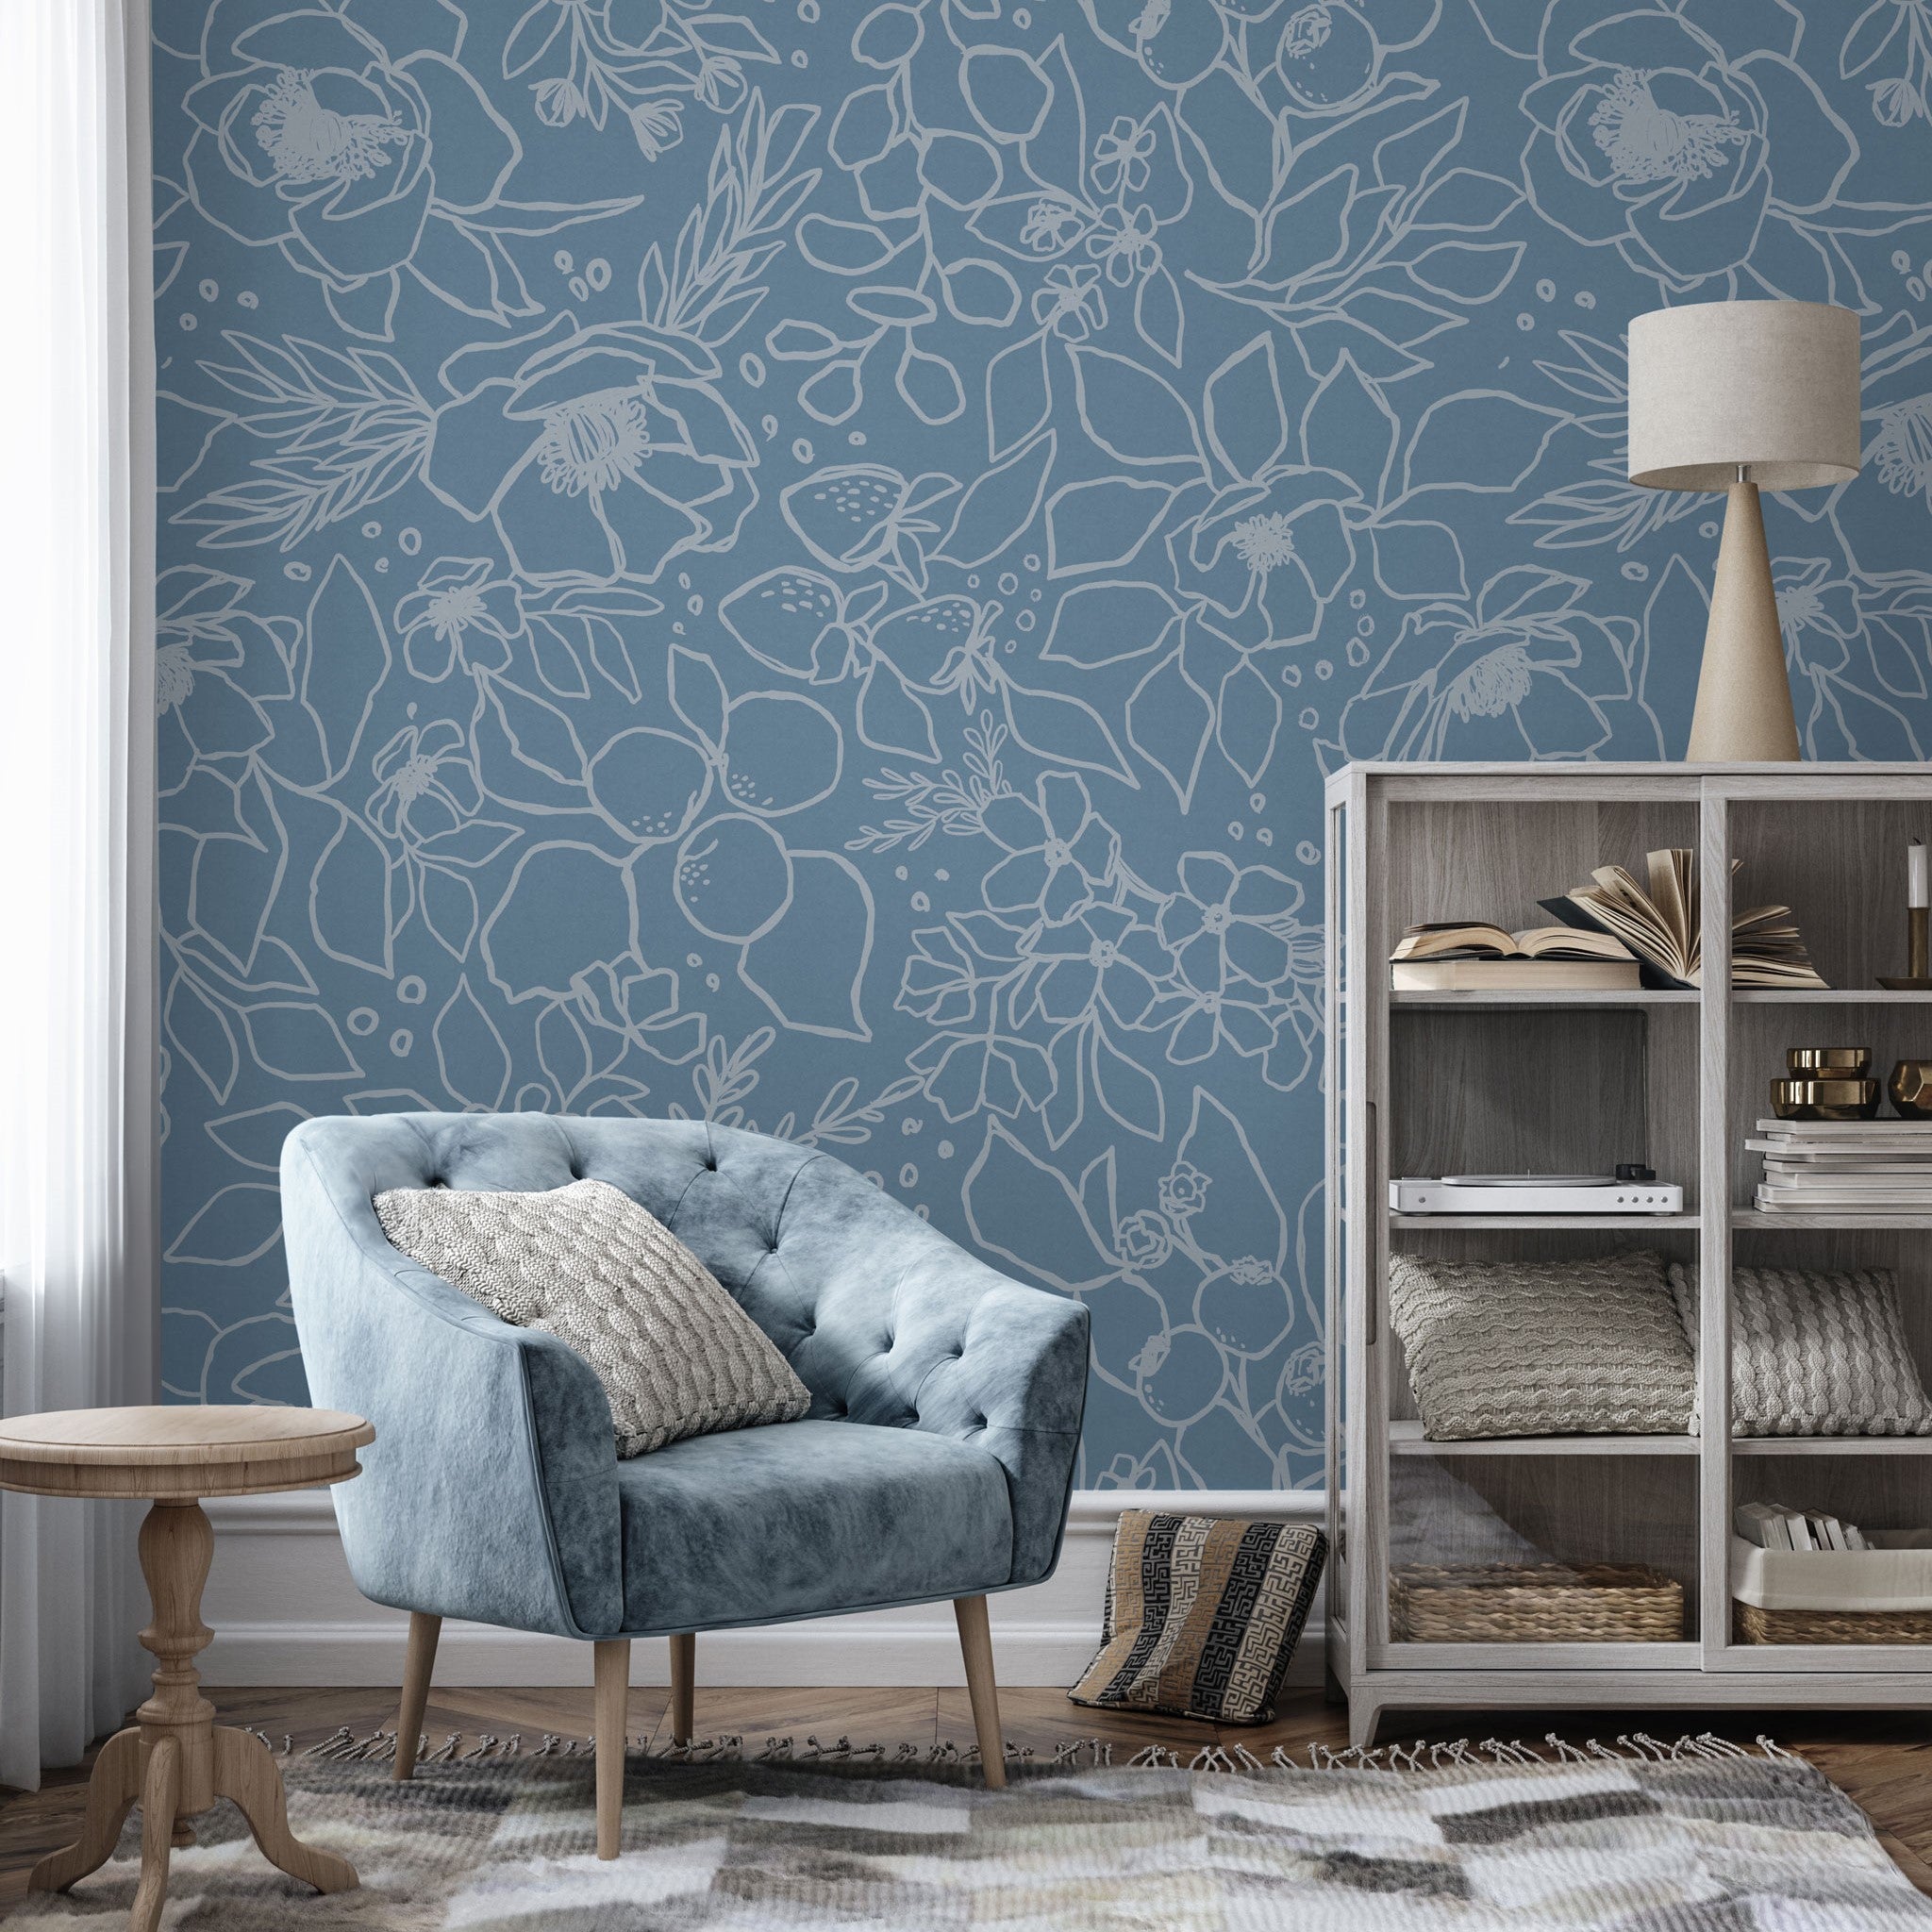 "Wall Blush 'Paige (Blue) Wallpaper' in a chic living room setting, cozy blue chair accentuating the floral design."